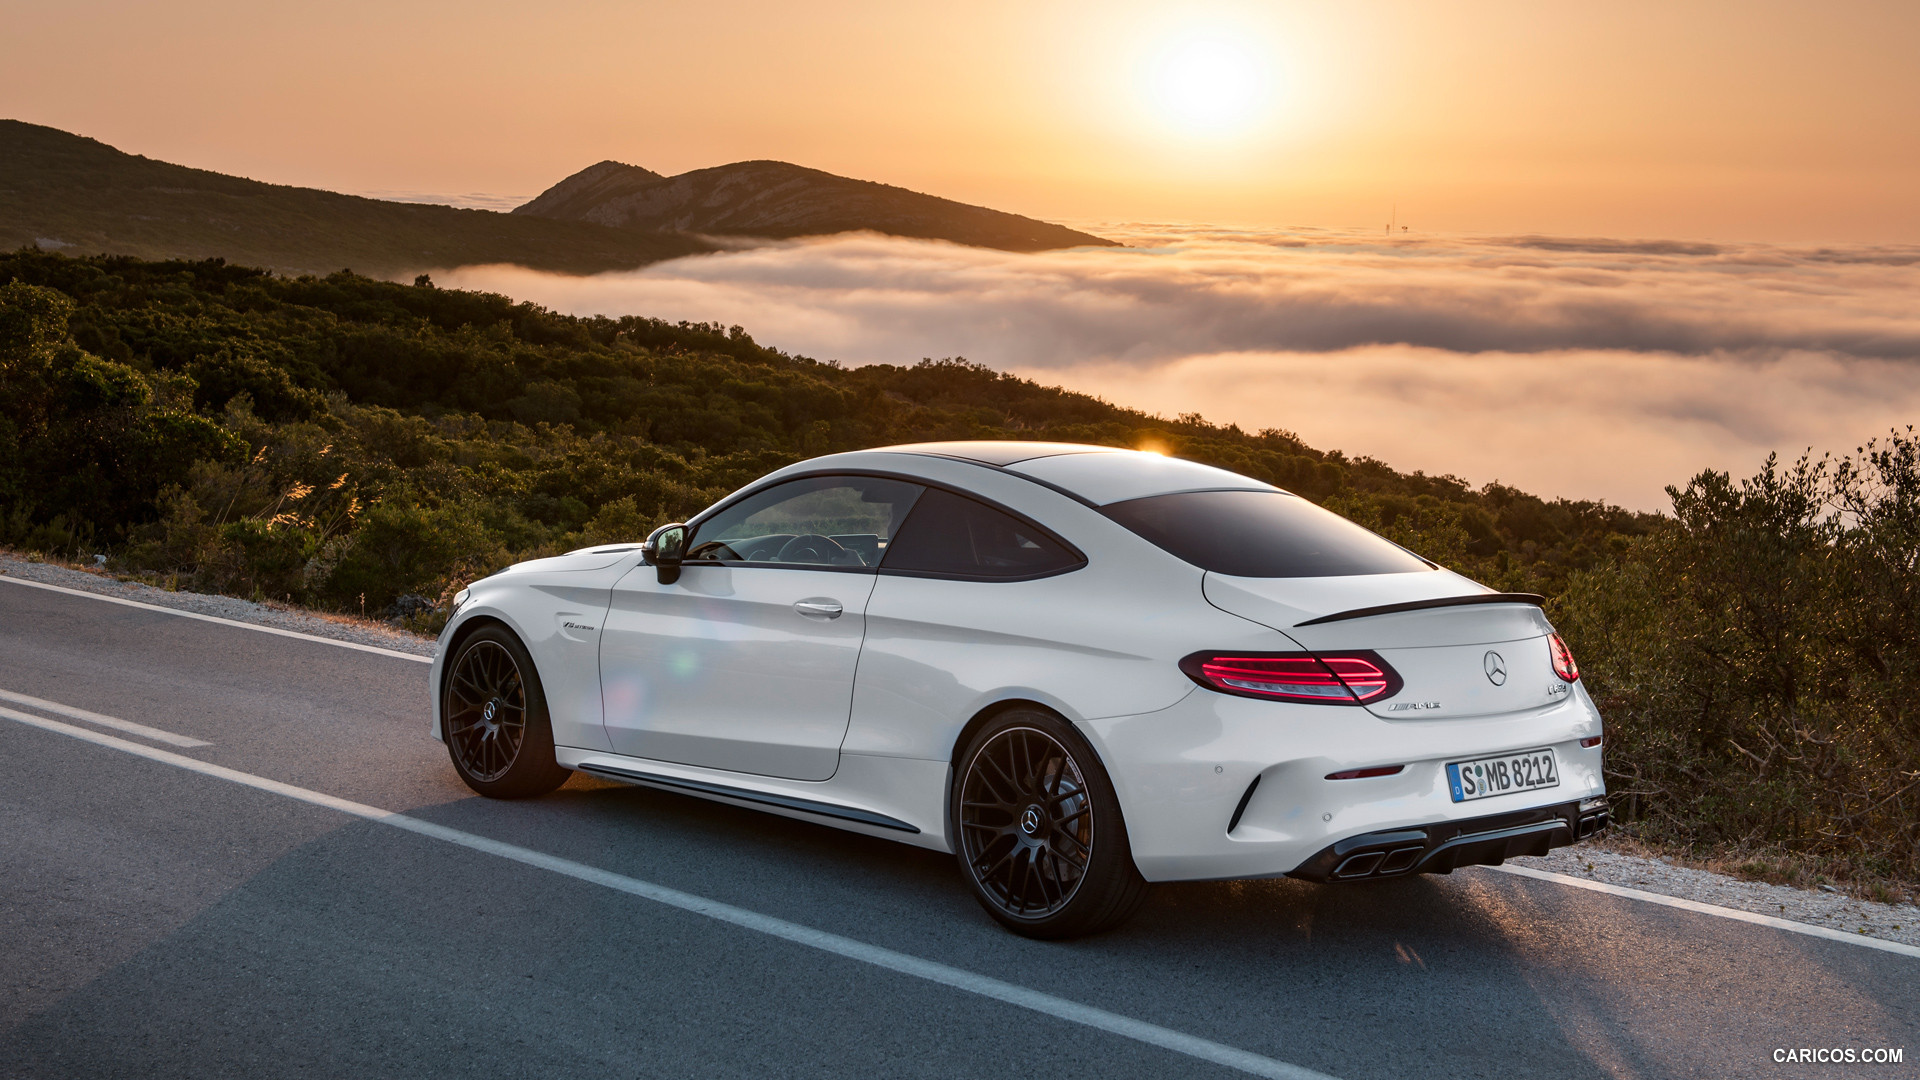 17 Mercedes Amg C63 Coupe Rear Hd Wallpaper 18